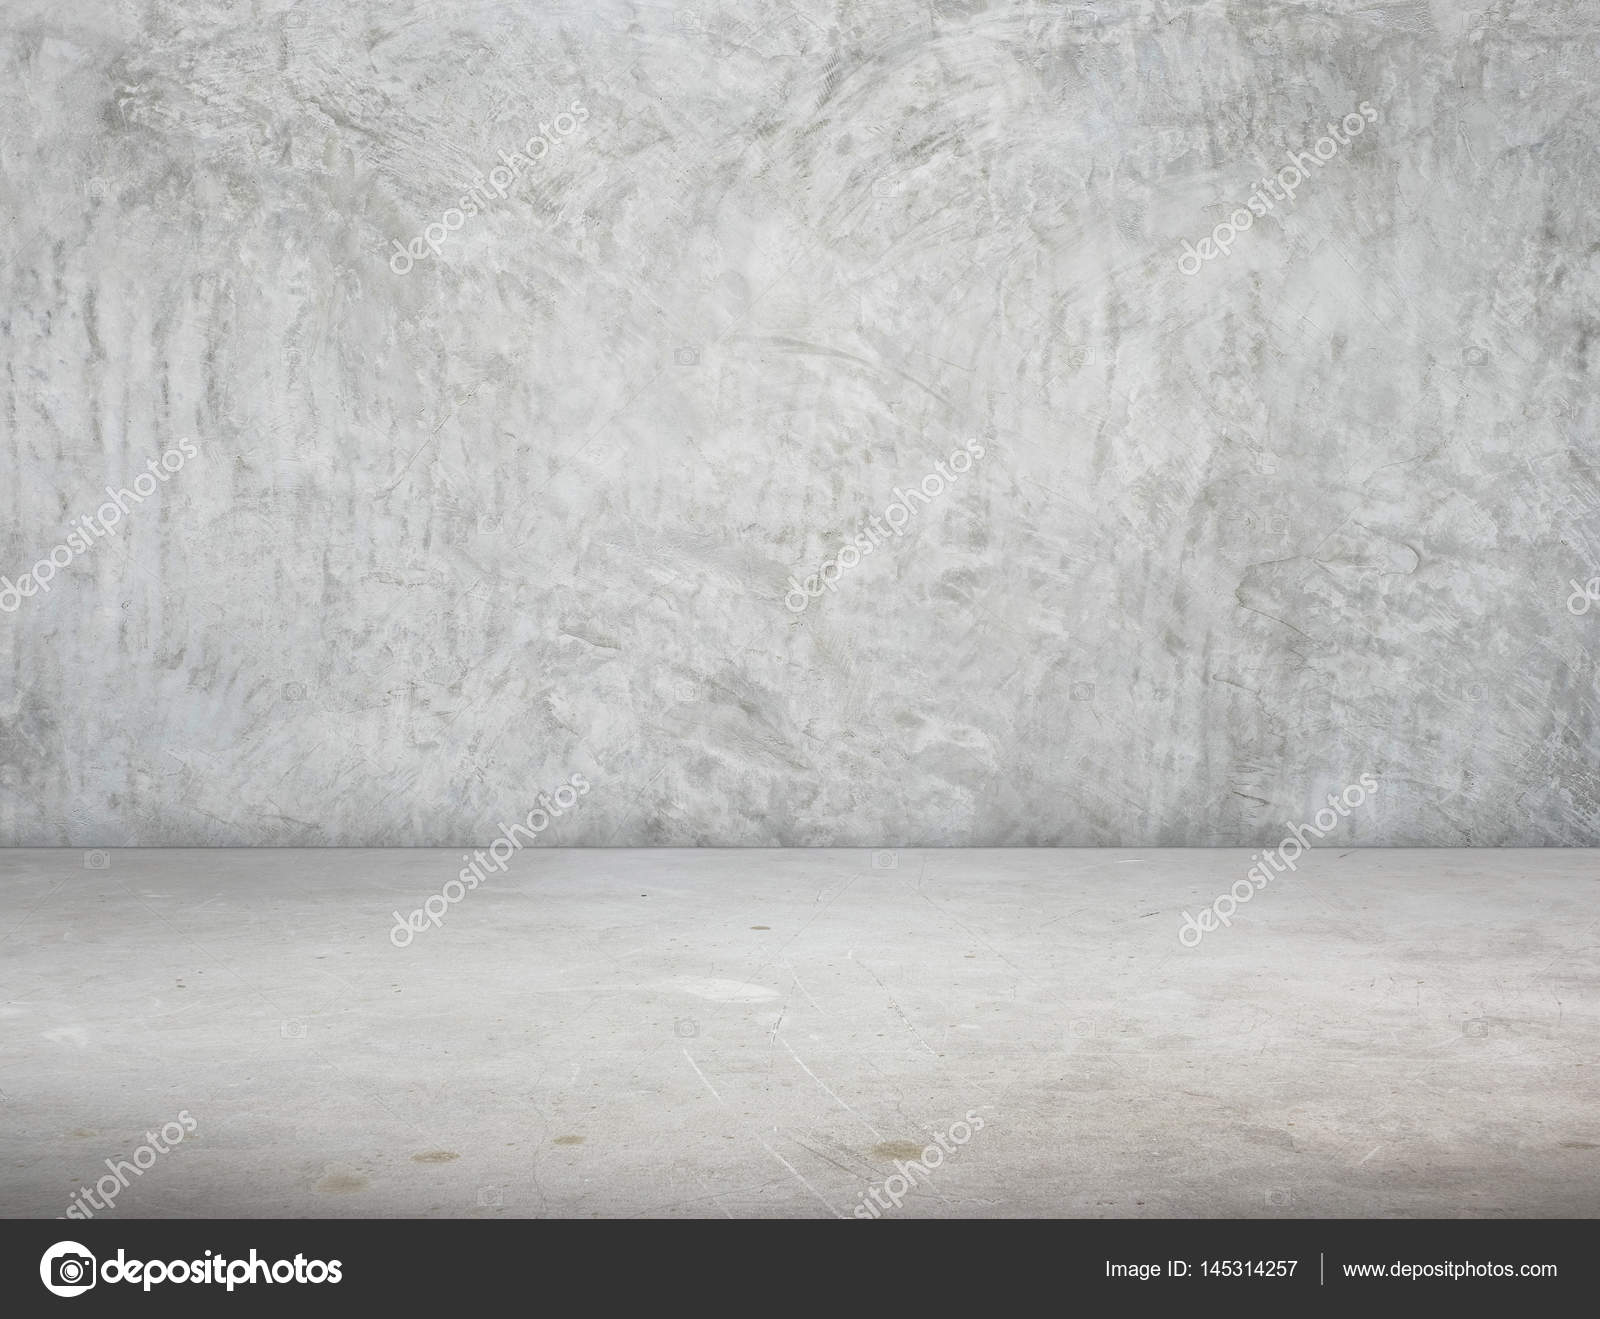 Empty Room perspective,grunge concrete wall and cement floor, Mo ...